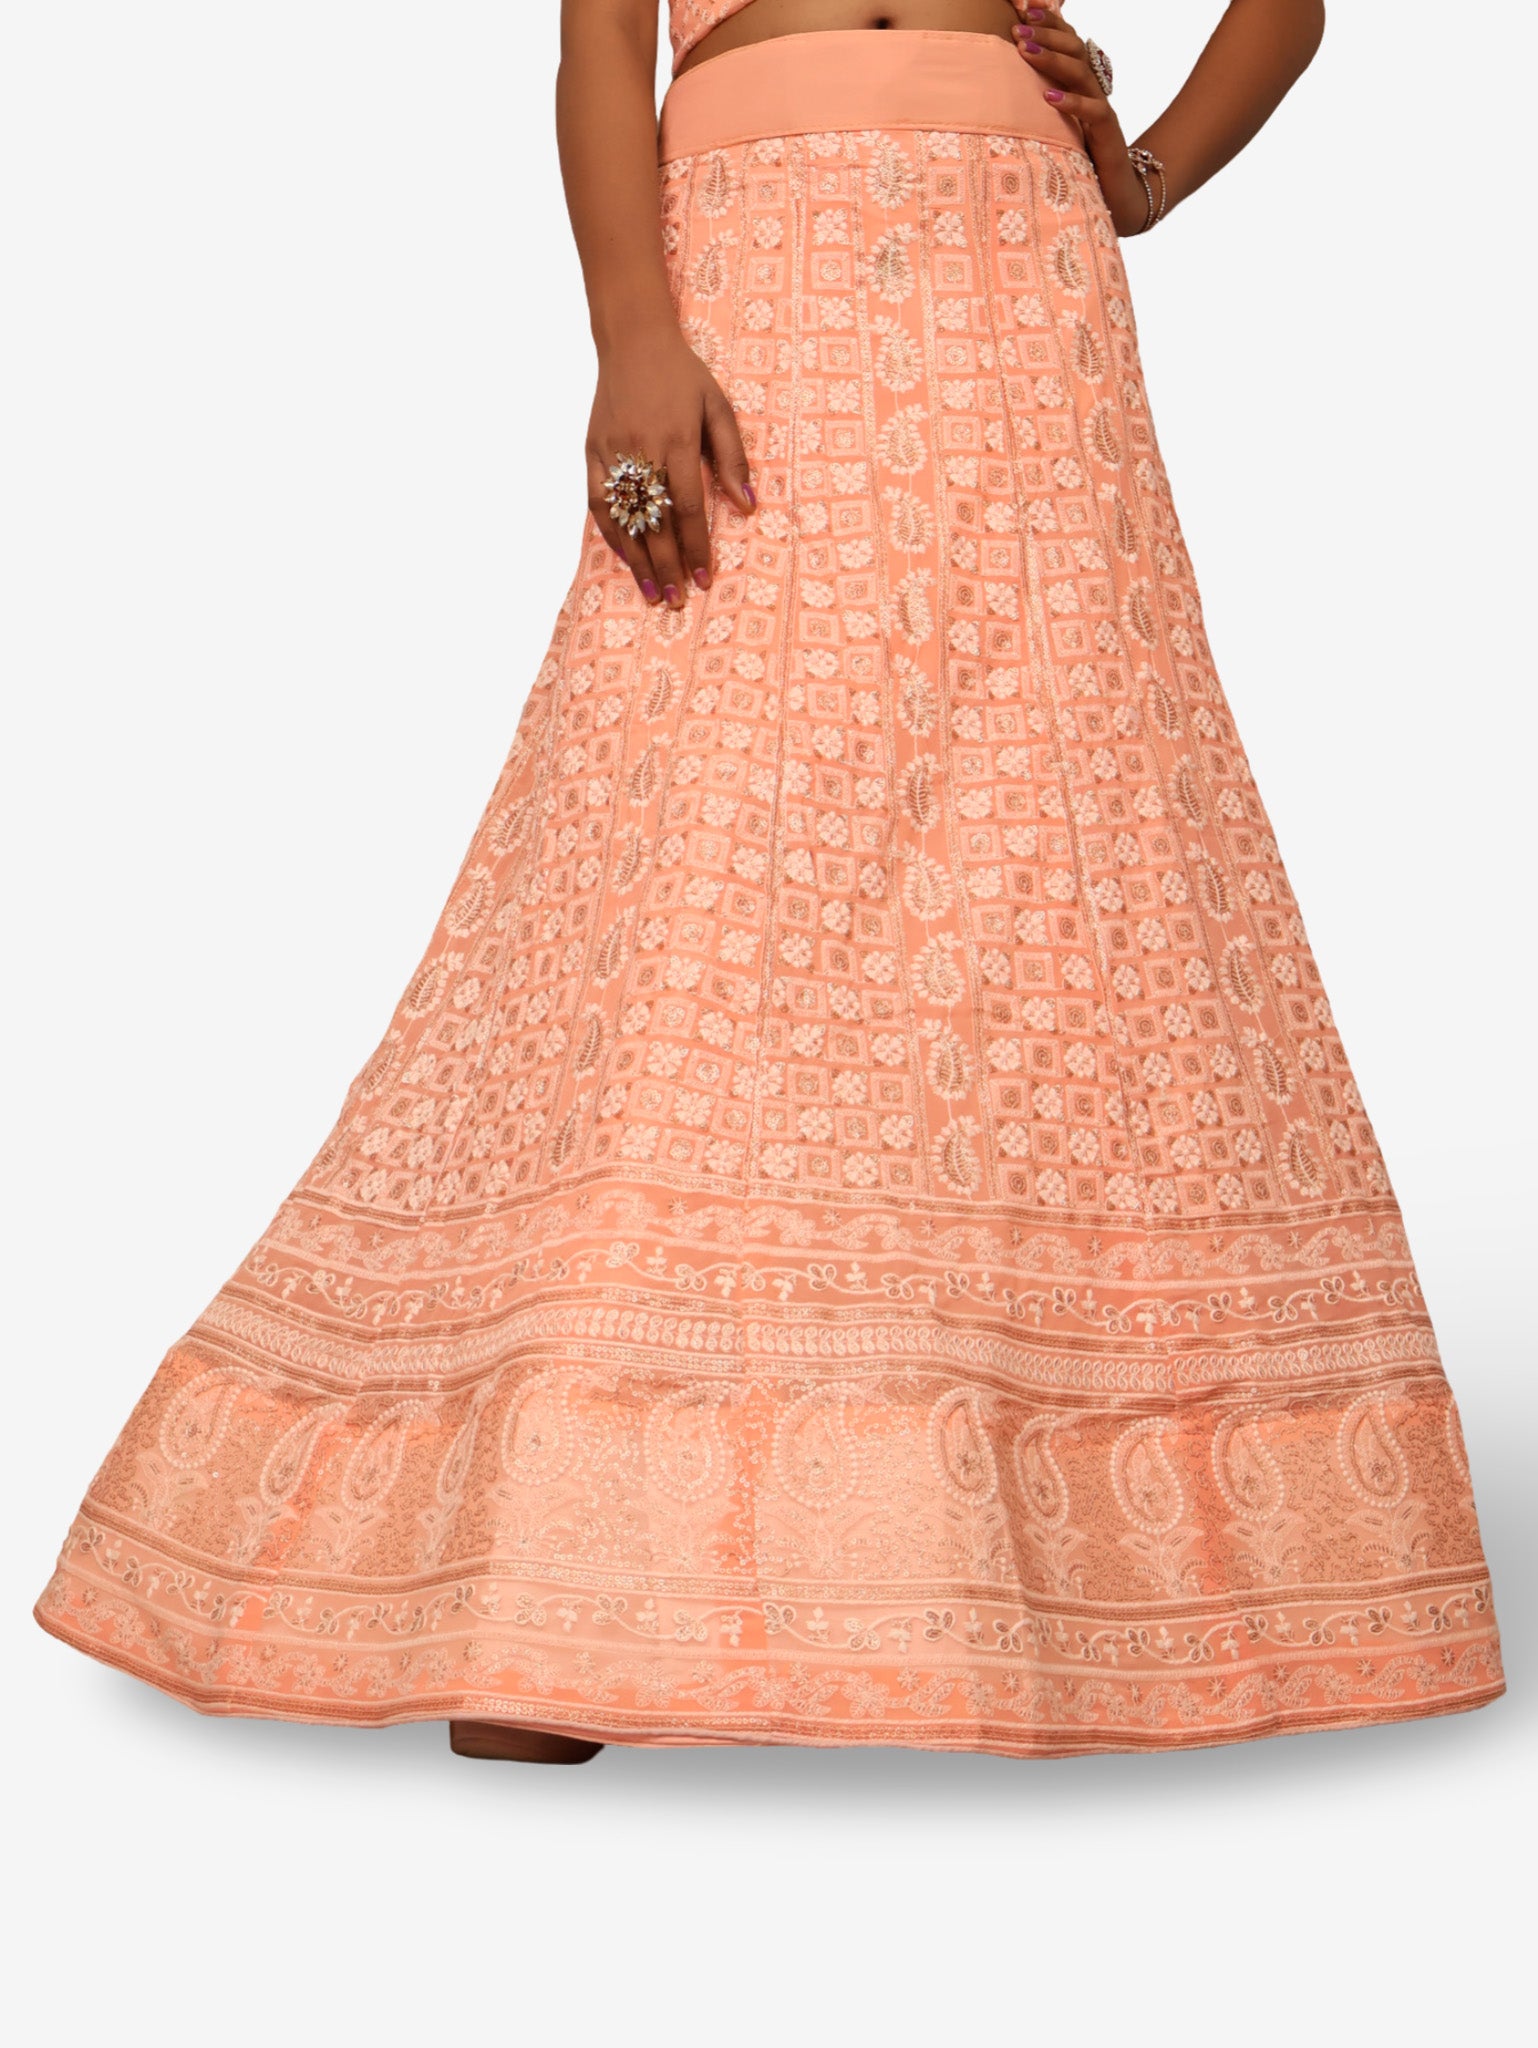 Semi-Stitched Lehenga with Embroidery &amp; Golden Sequin work by Shreekama Peach Semi-Stitched Lehenga for Party Festival Wedding Occasion in Noida